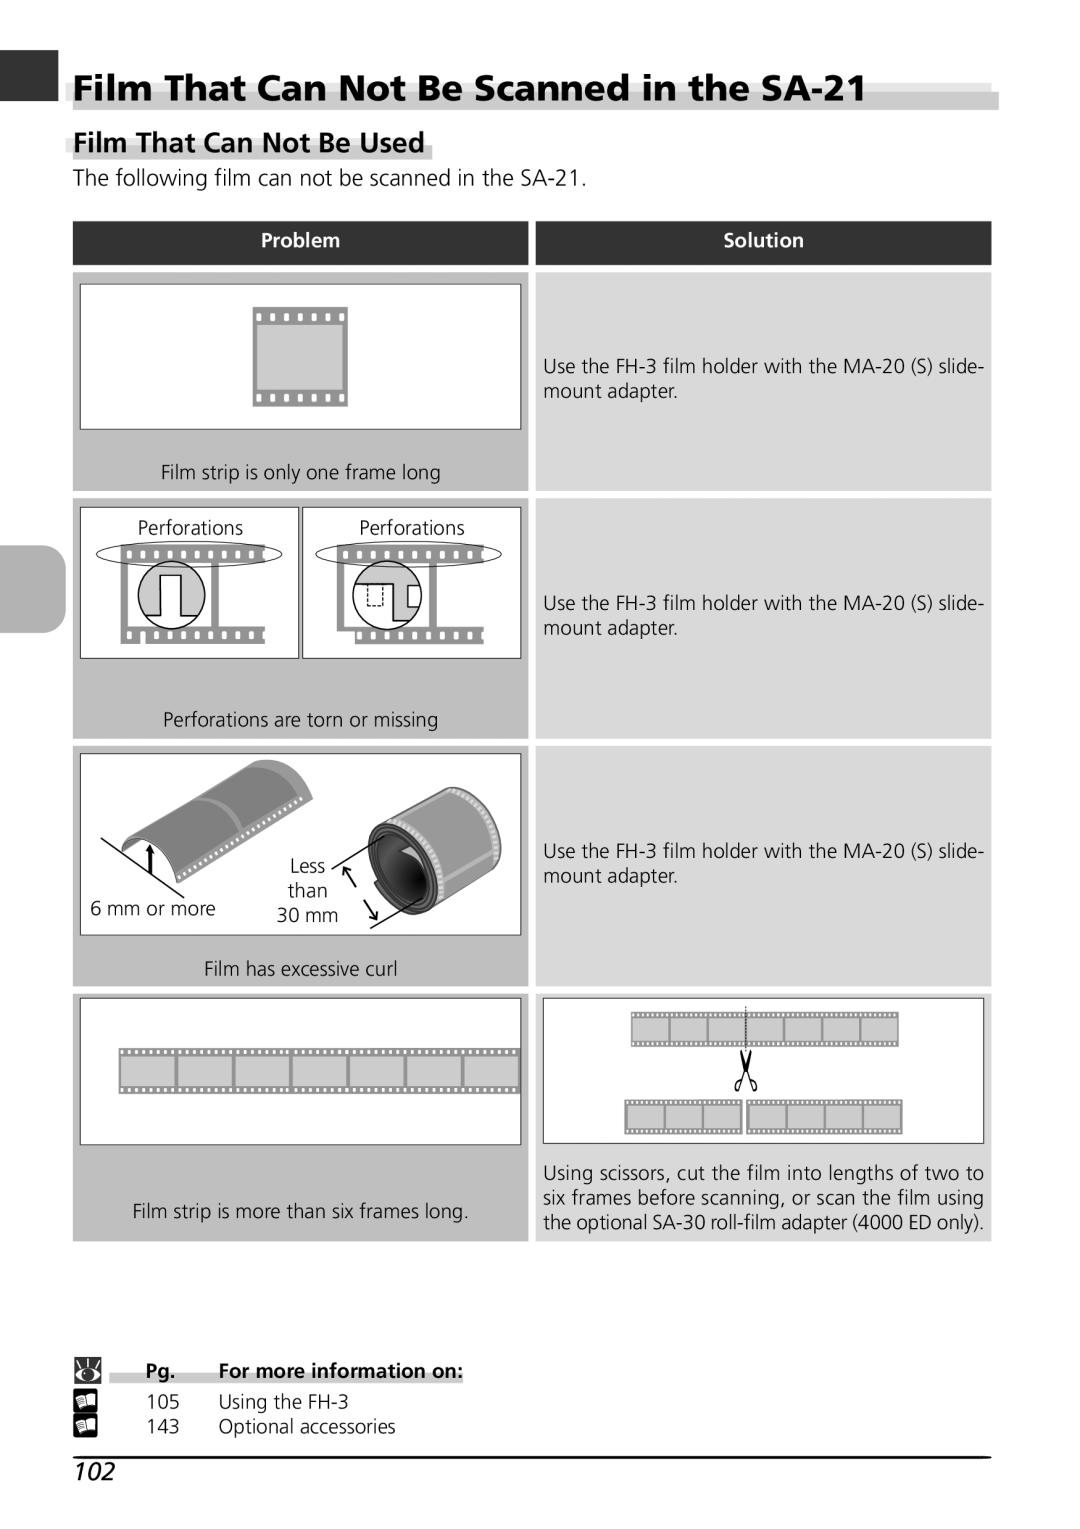 Nikon LS4000 user manual Film That Can Not Be Scanned in the SA-21, Film That Can Not Be Used, Problem, Solution 